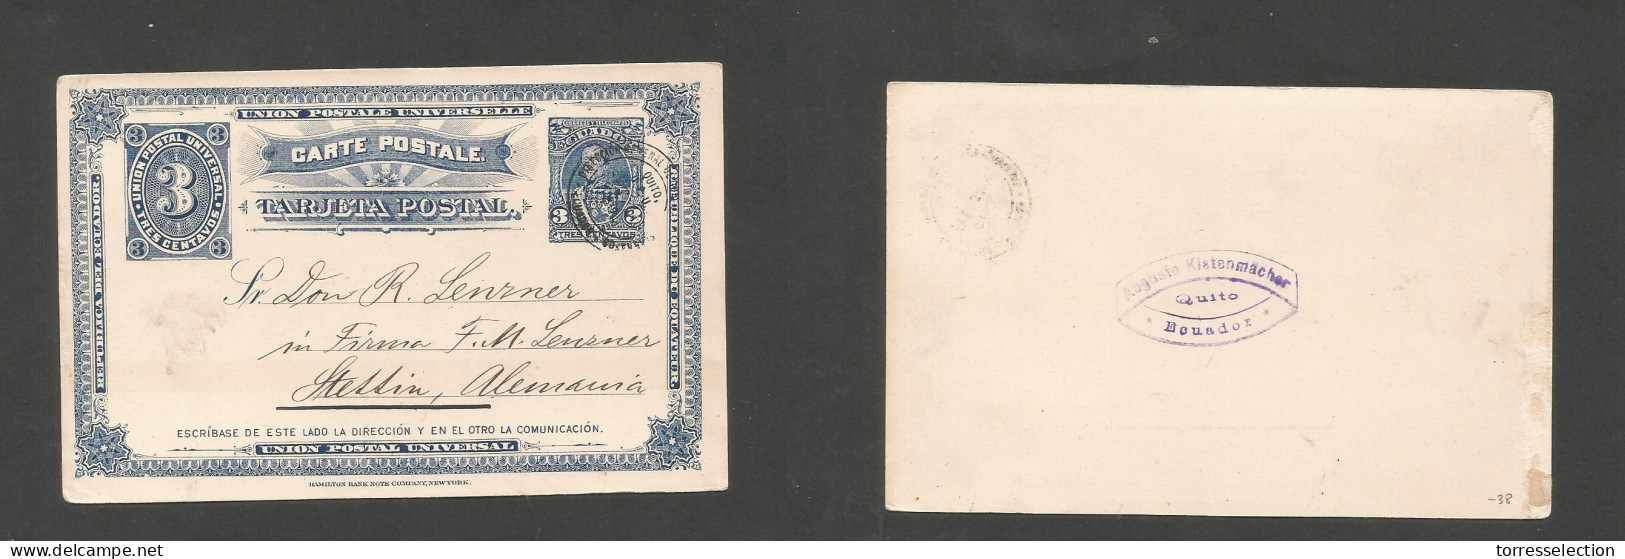 ECUADOR. C. 1896. Quito - Germany, Stettin. 3c Blue Illustrated Stat Card, Cancelled Cds. VF, Scarce Usage. - Equateur